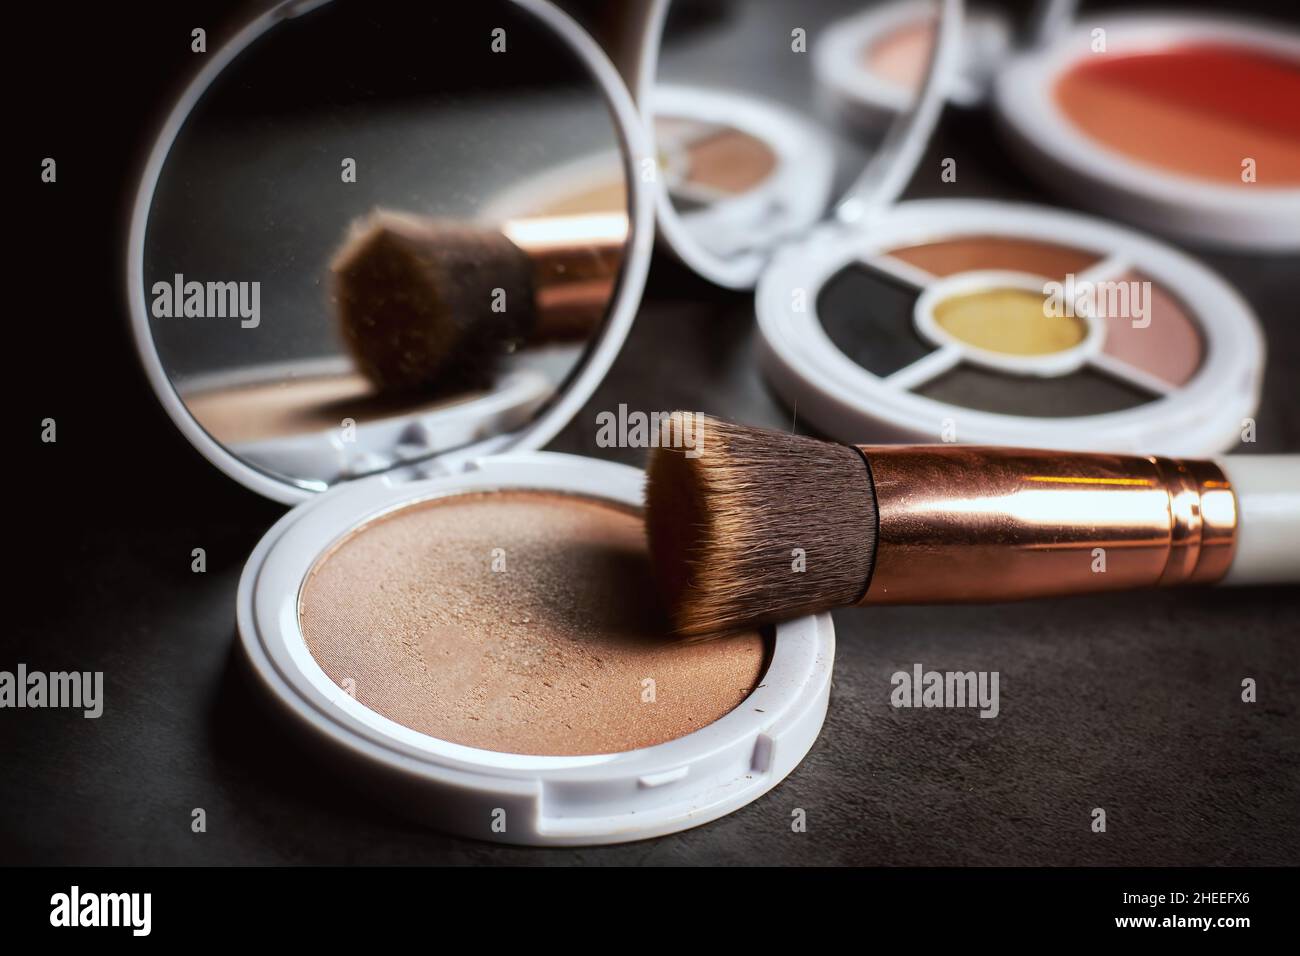 Foundation with a make up brush. Stock Photo